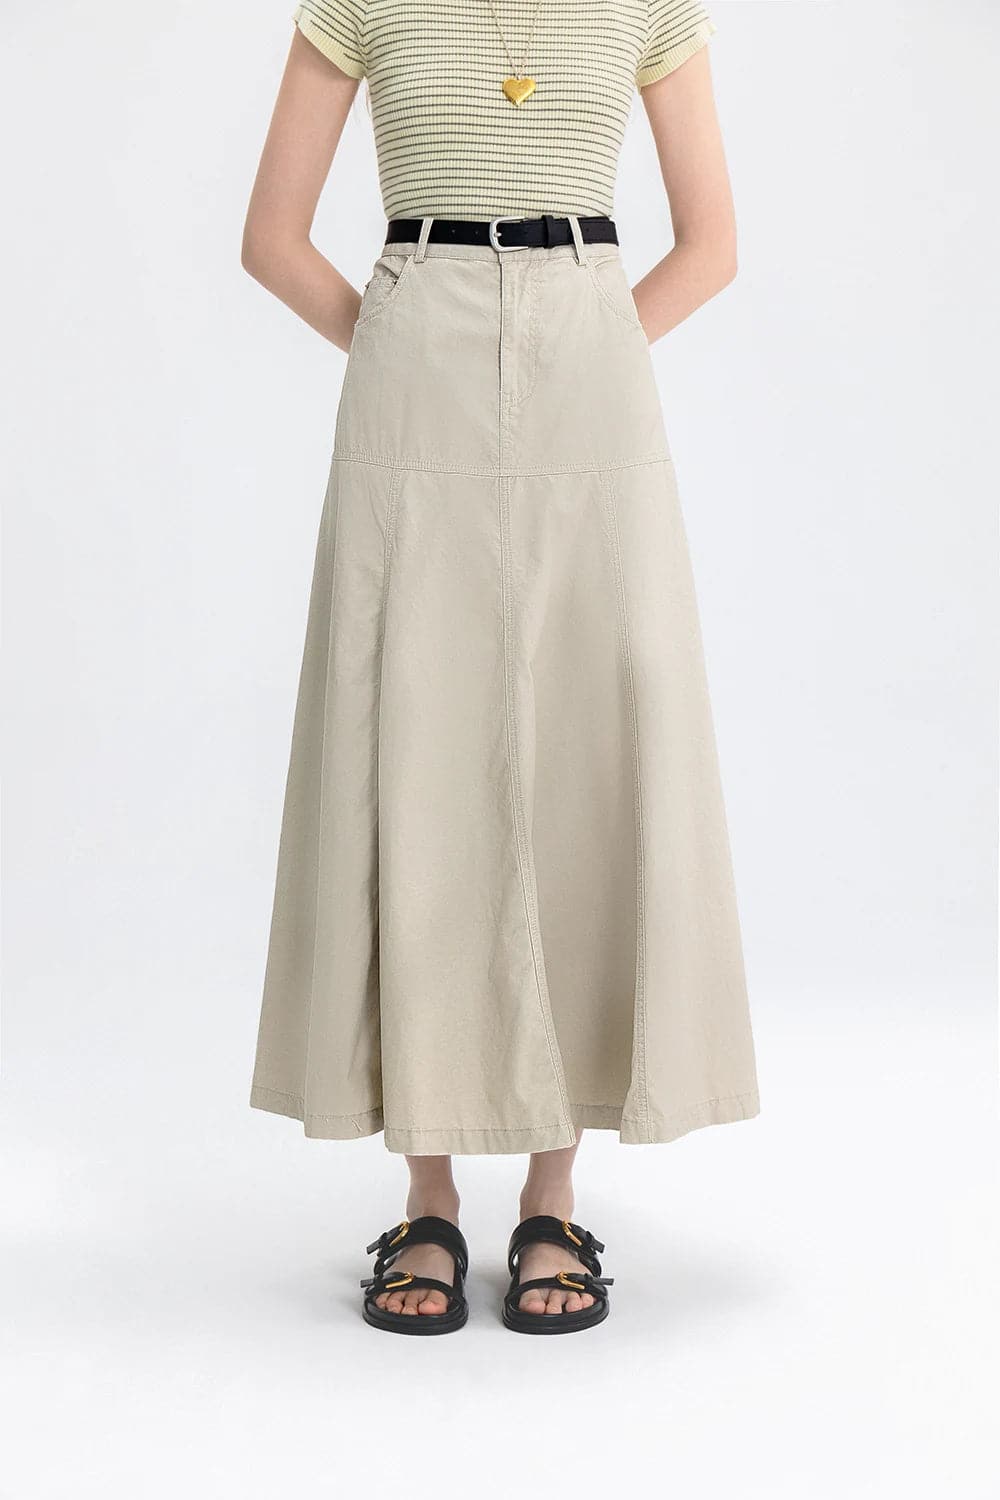 Chic High-Waisted A-Line Skirt with Elegant Flair